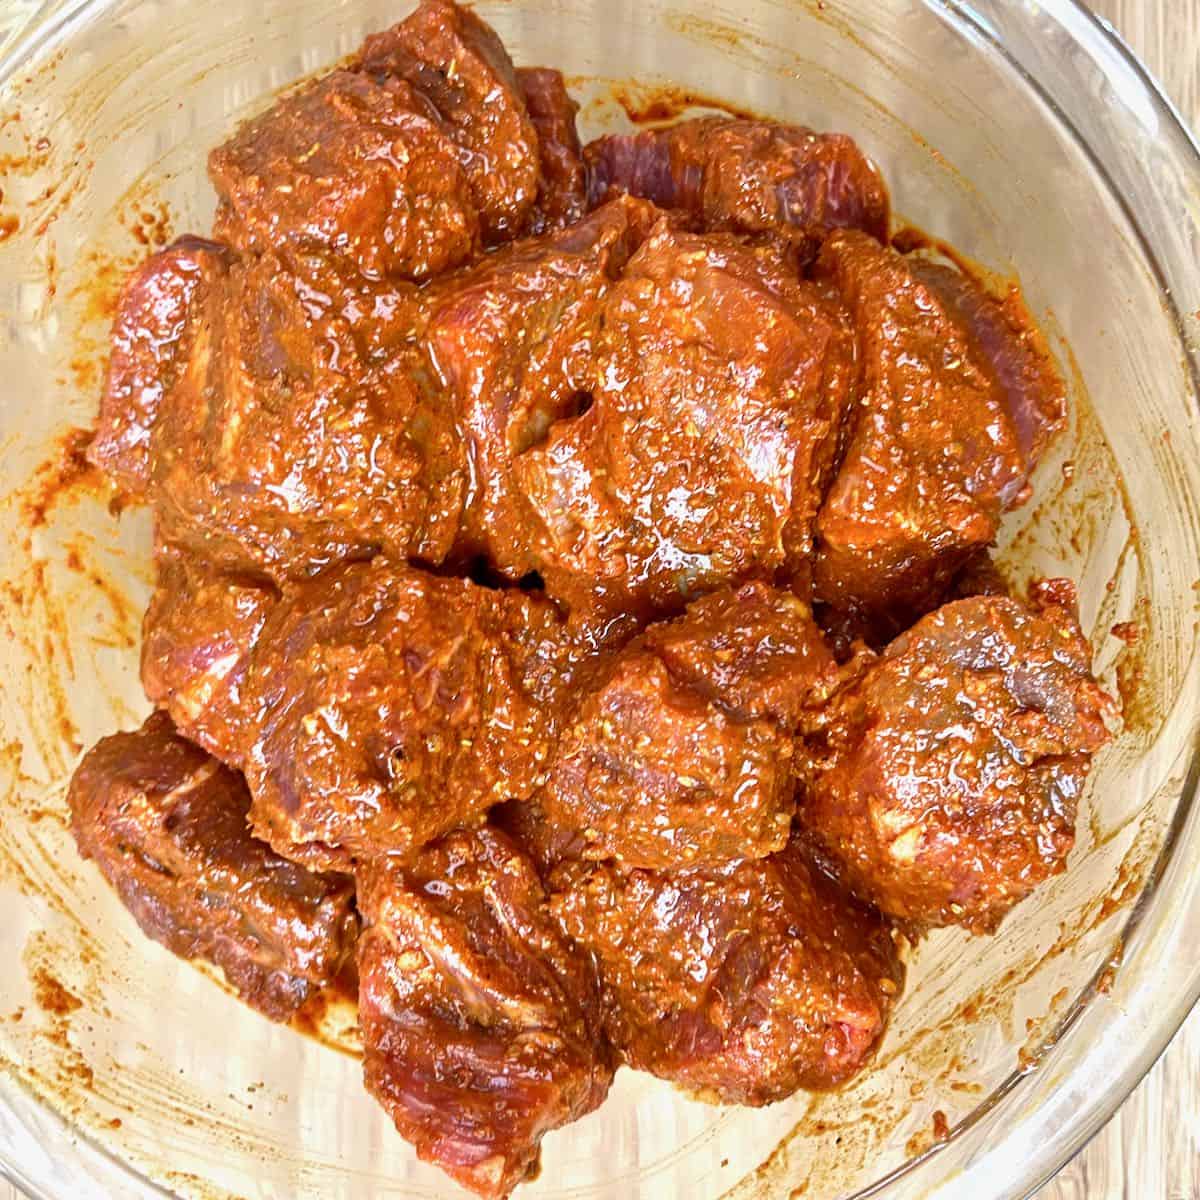 Lamb vindaloo meat coated with the marinade